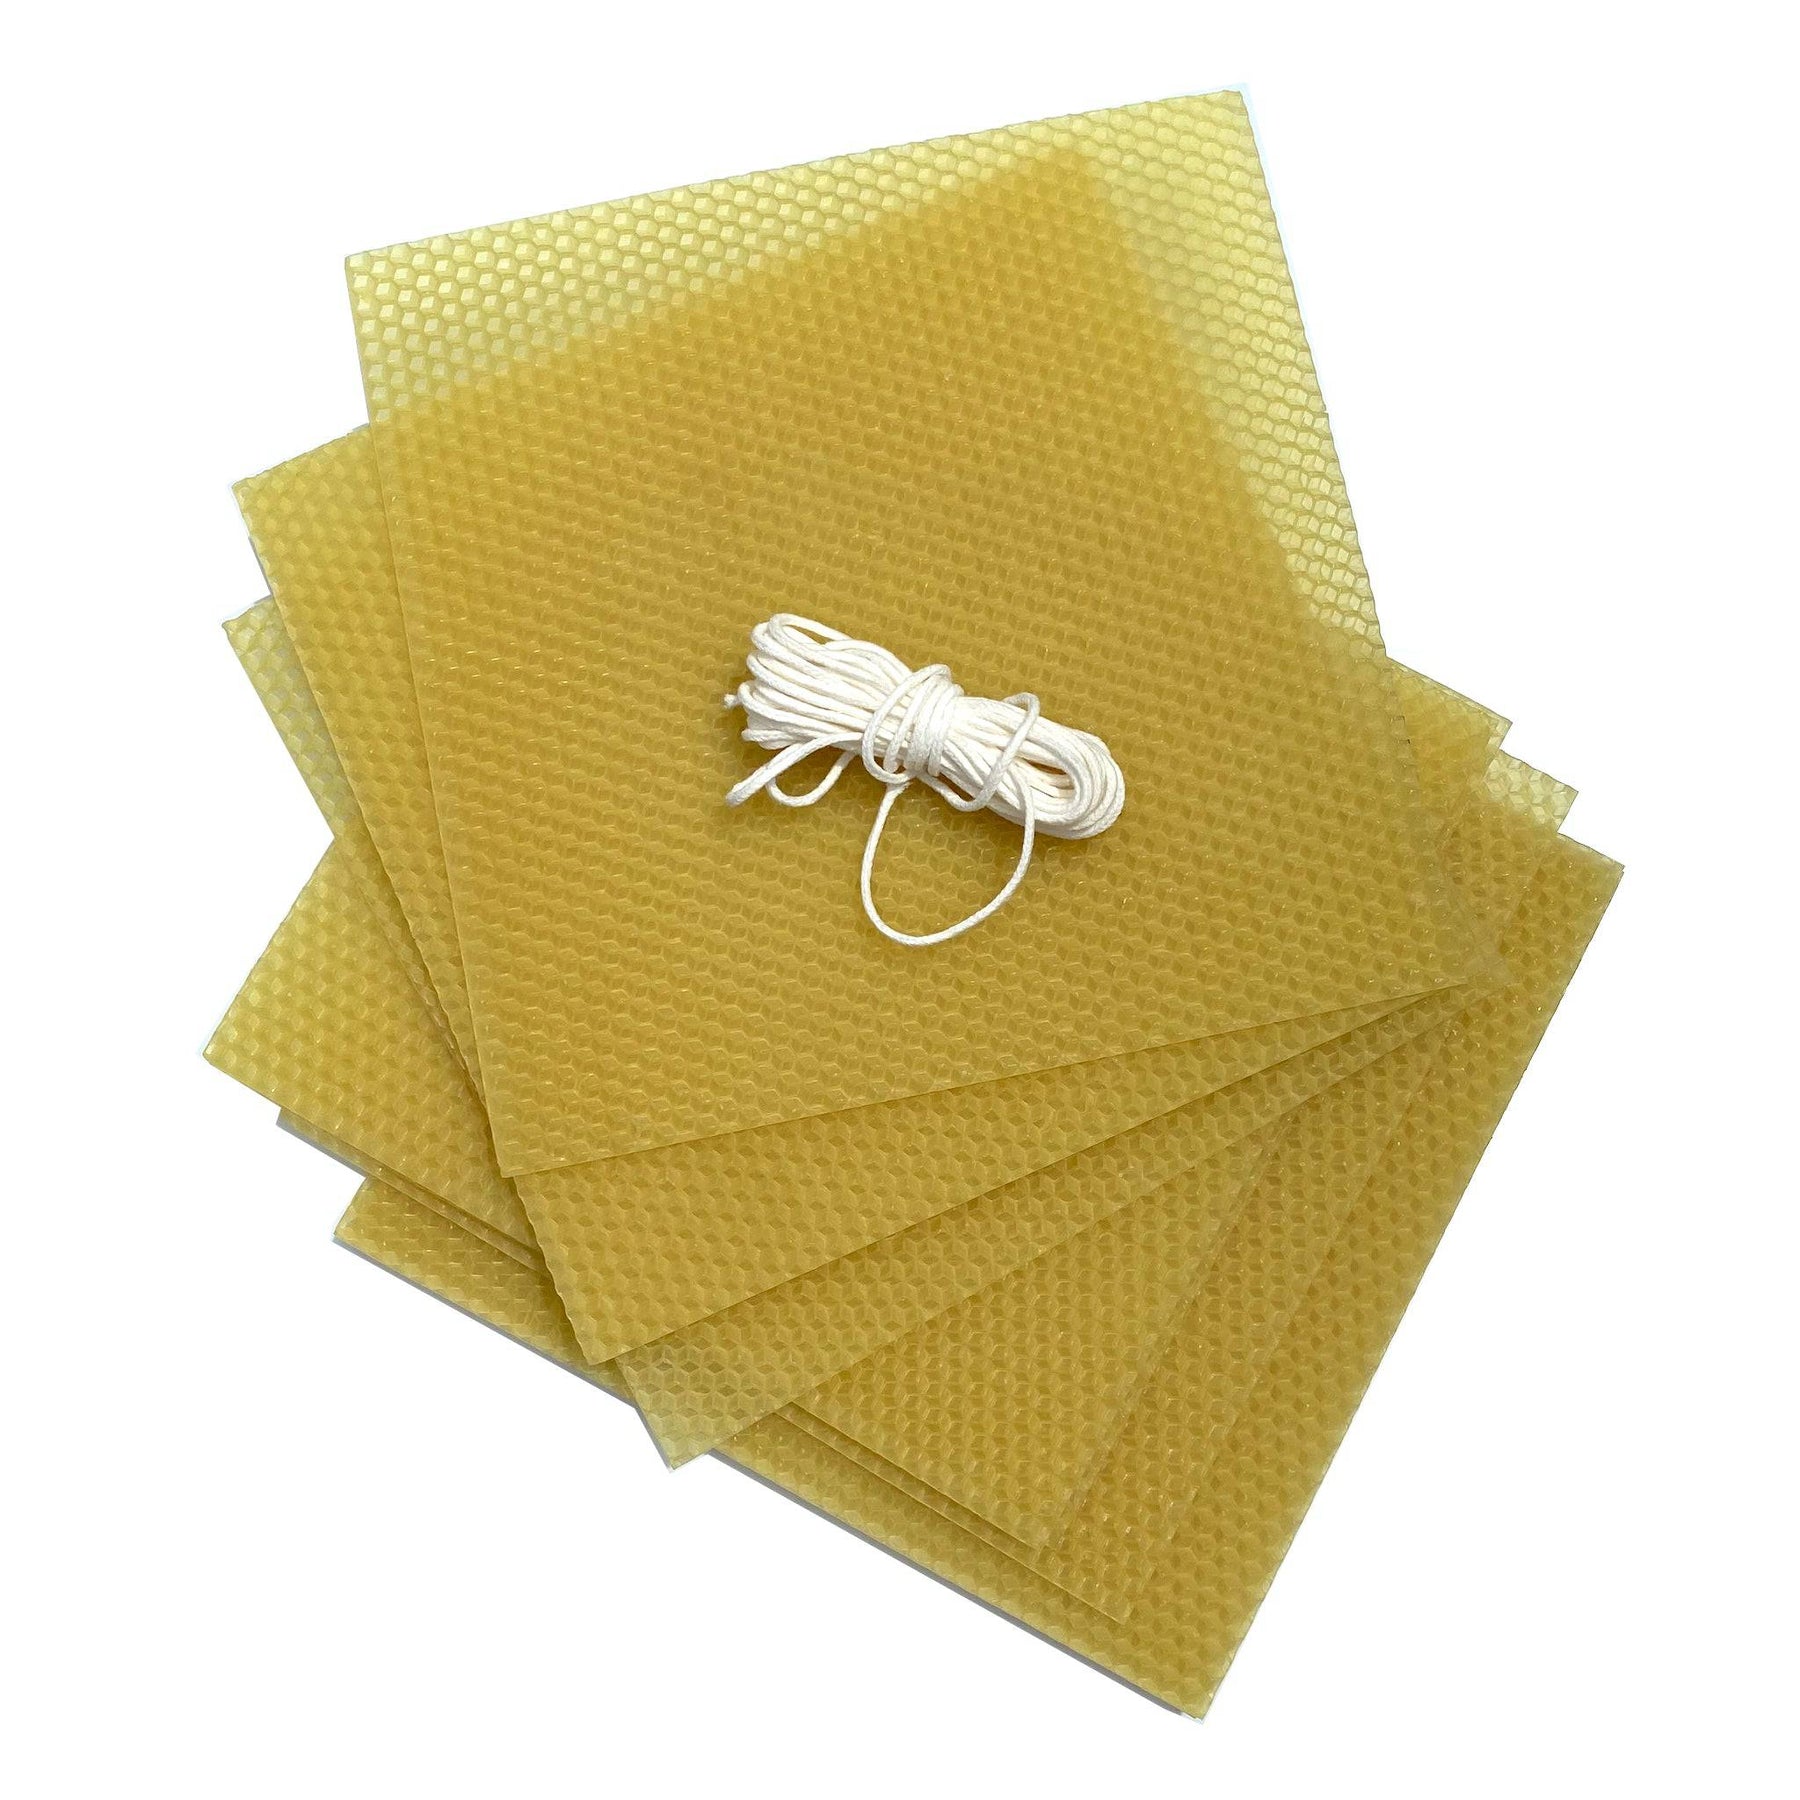 Red Beeswax Sheets for Candle Making - Organic Beeswax Candle